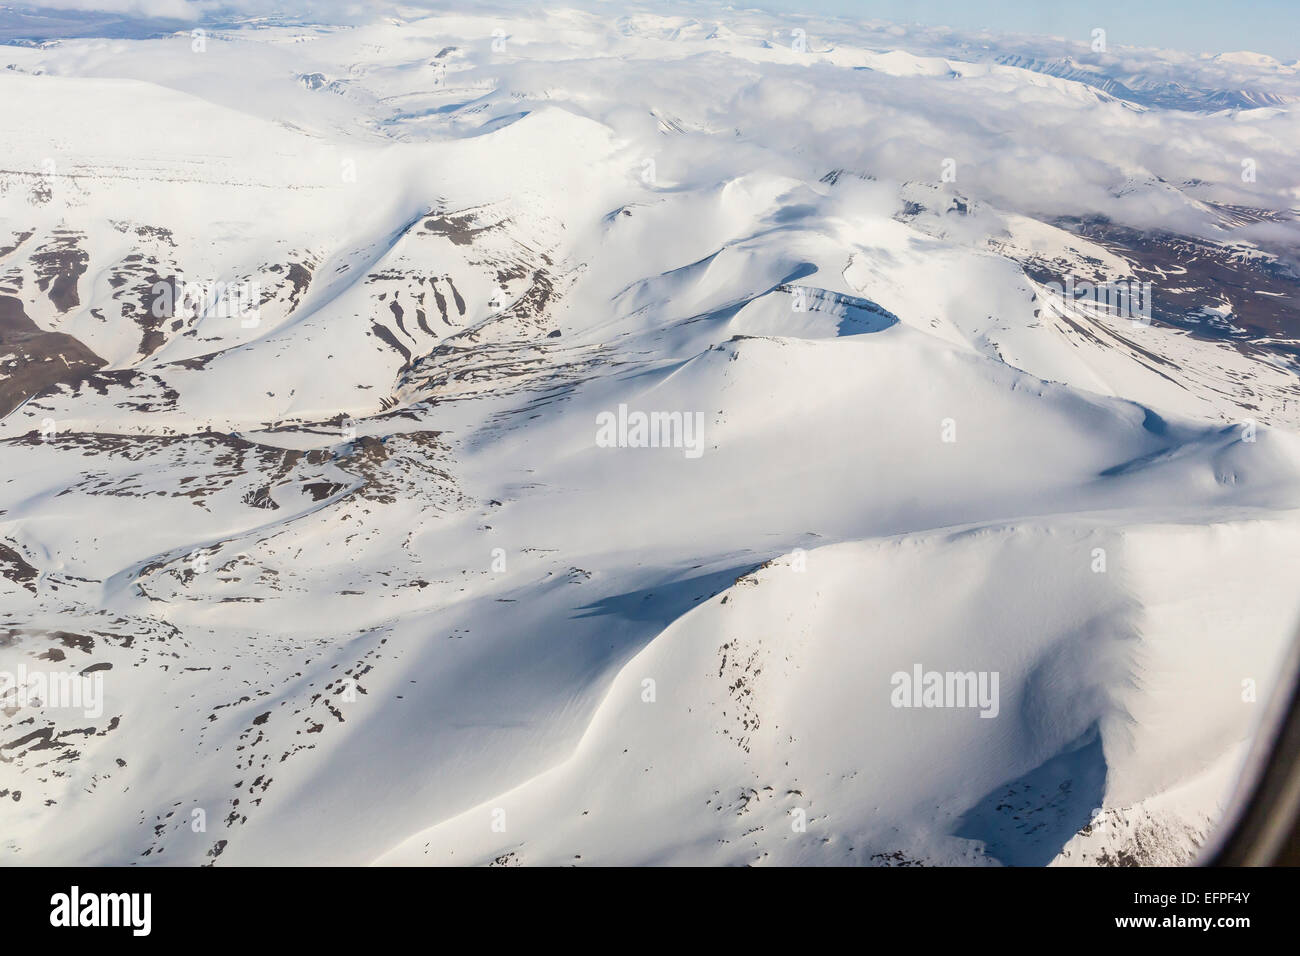 Aerial View Of Mountains Glaciers And Ice Fields On The West Coast Of